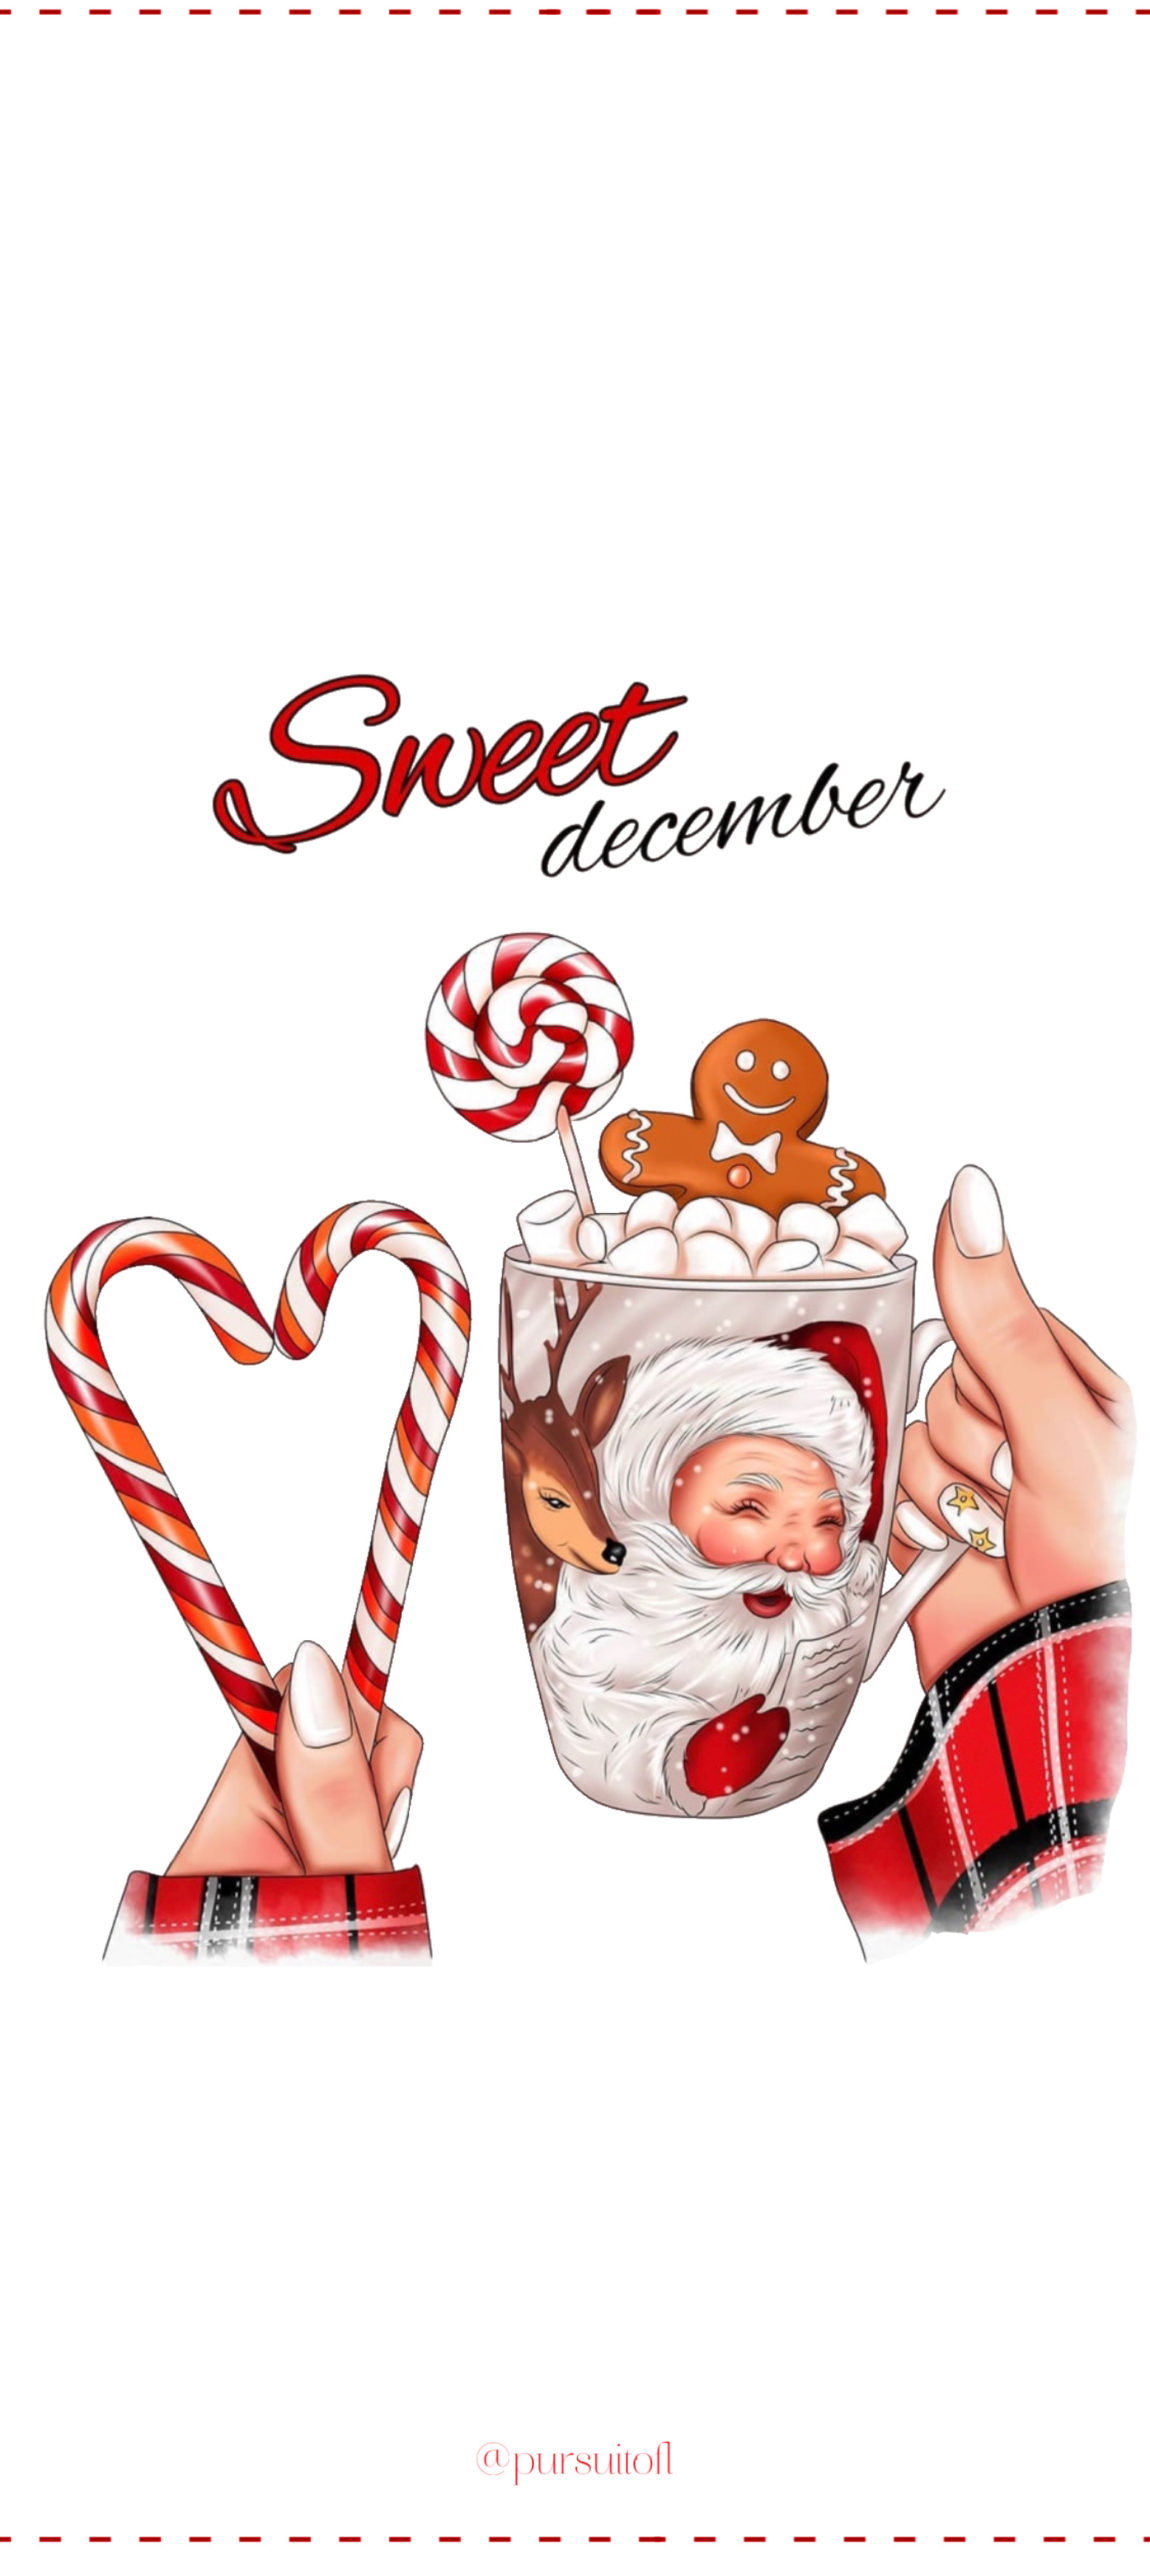 White Holiday Phone Wallpaper with Sweet December text and hands holding Santa and reindeer Hot Chocolate Mug, candy canes, and gingerbread man